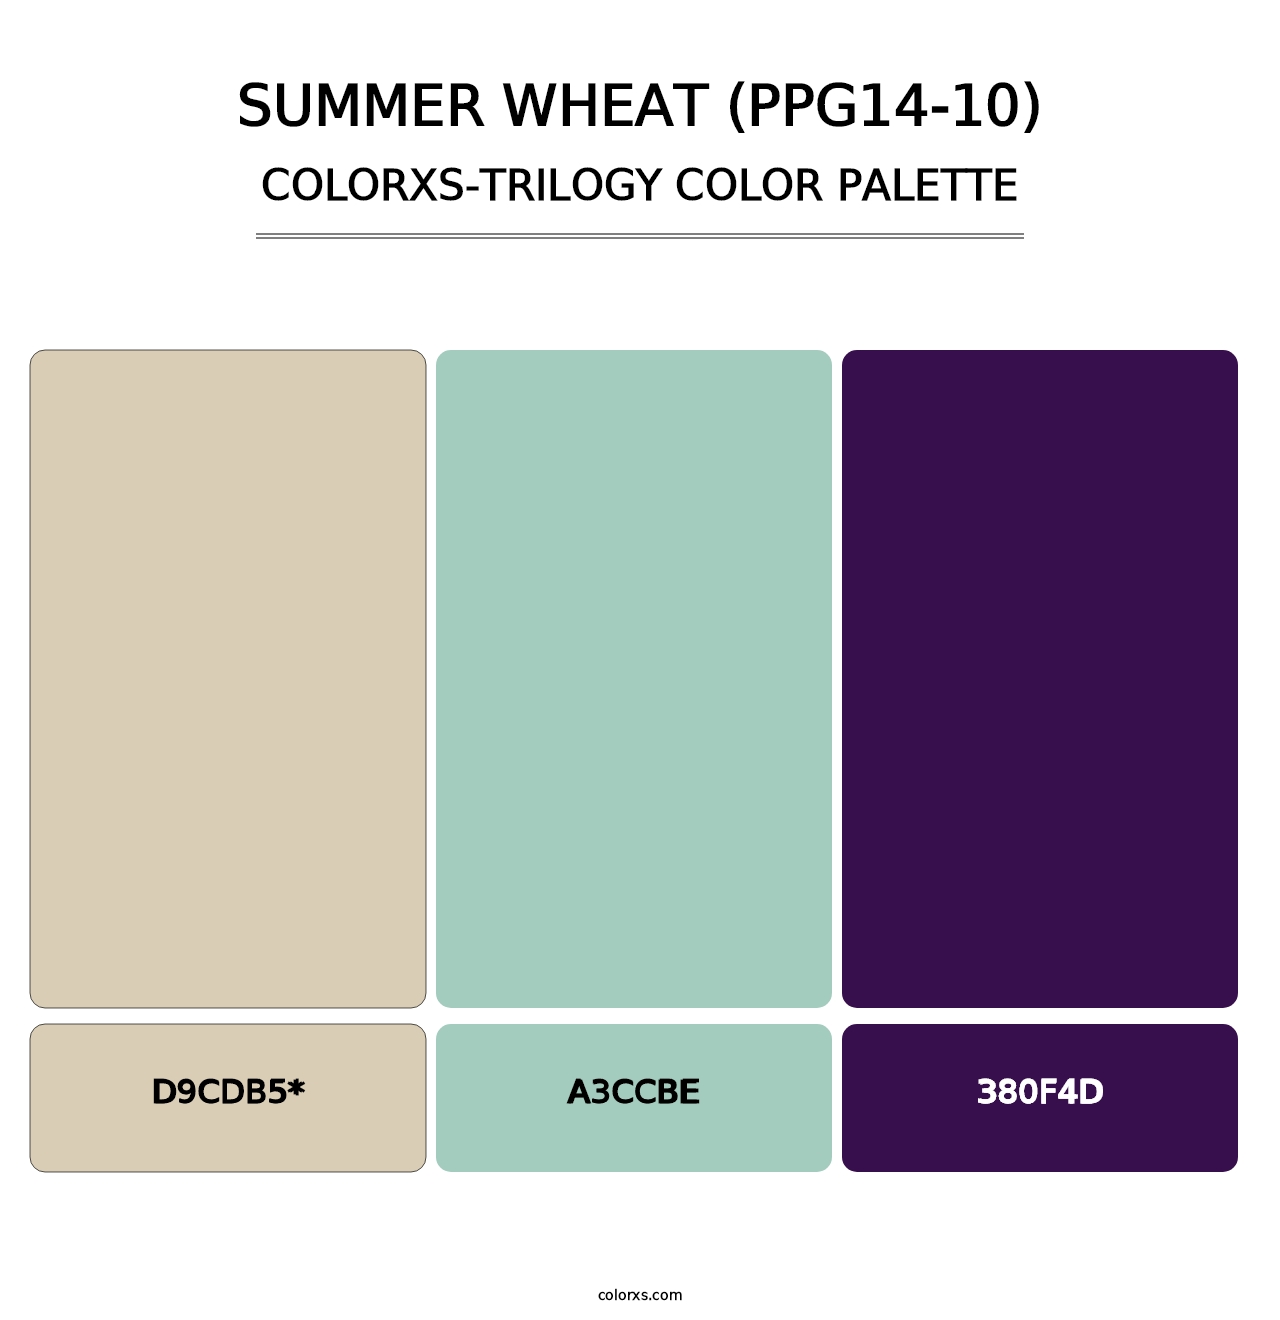 Summer Wheat (PPG14-10) - Colorxs Trilogy Palette